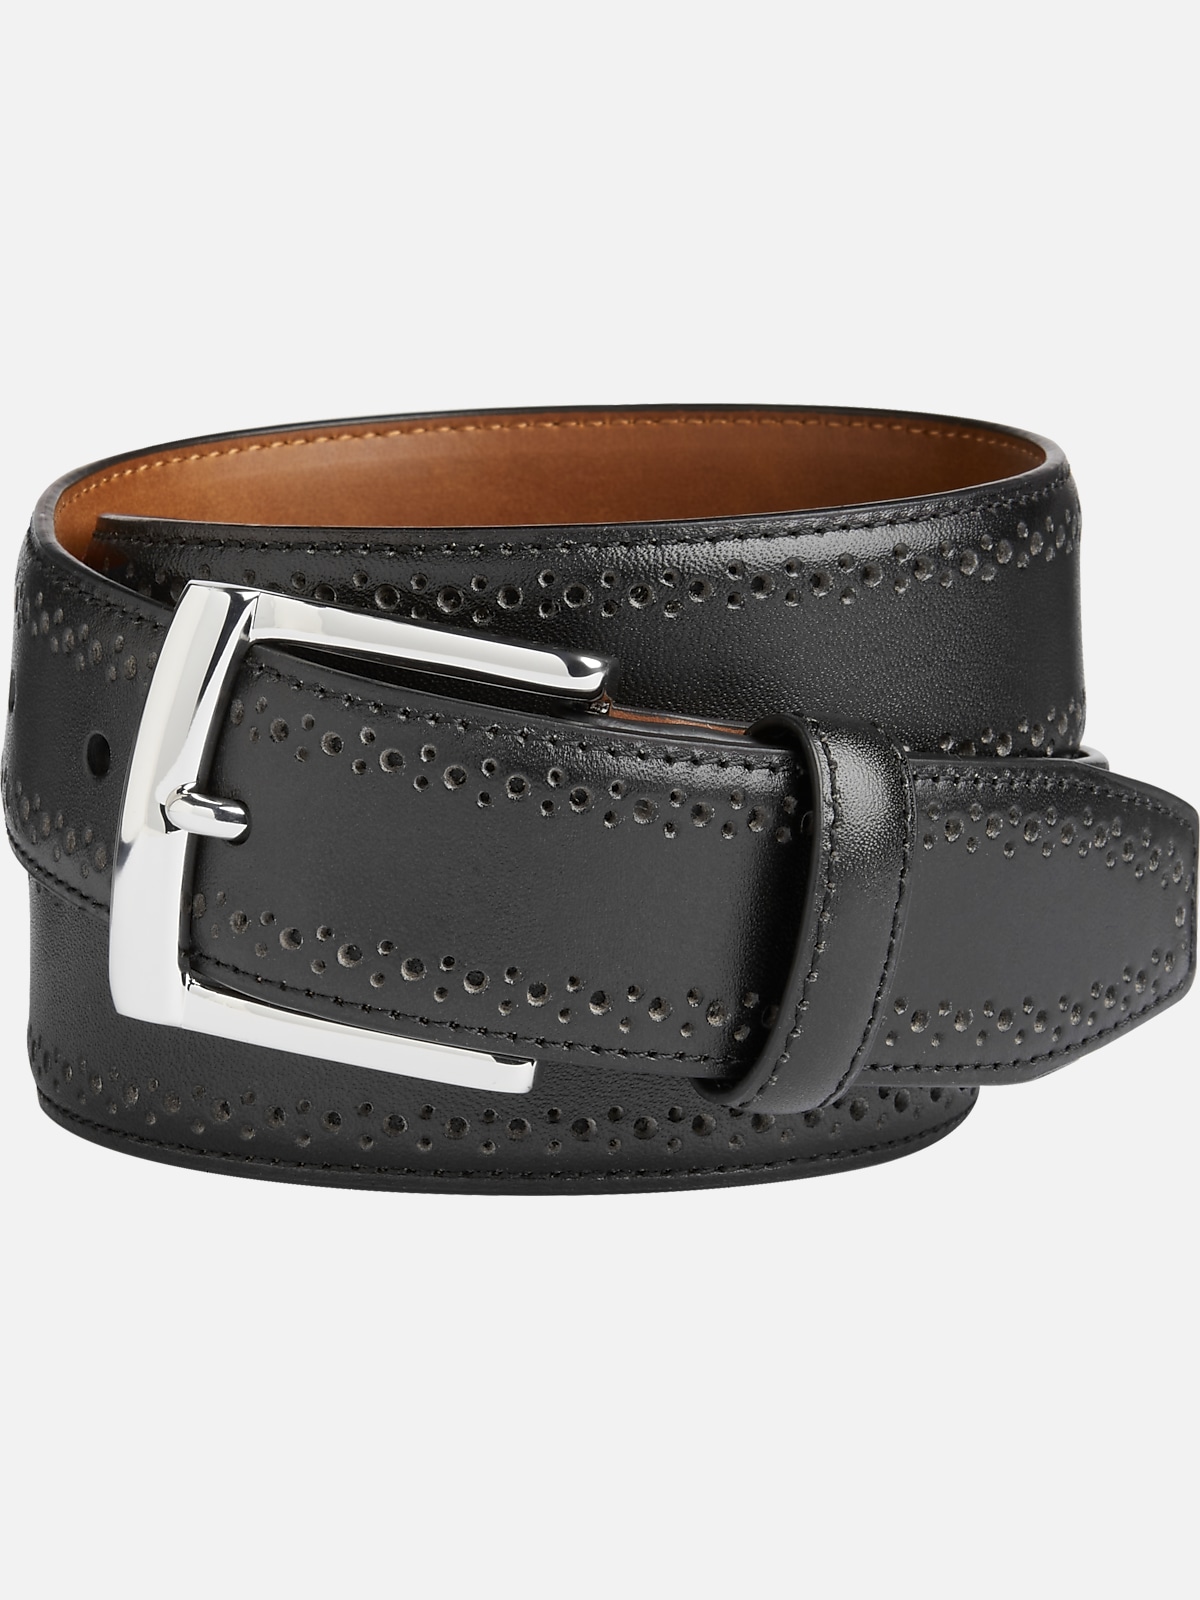 Johnston & Murphy Perforated Edge Belt | All Clearance $39.99| Men's ...